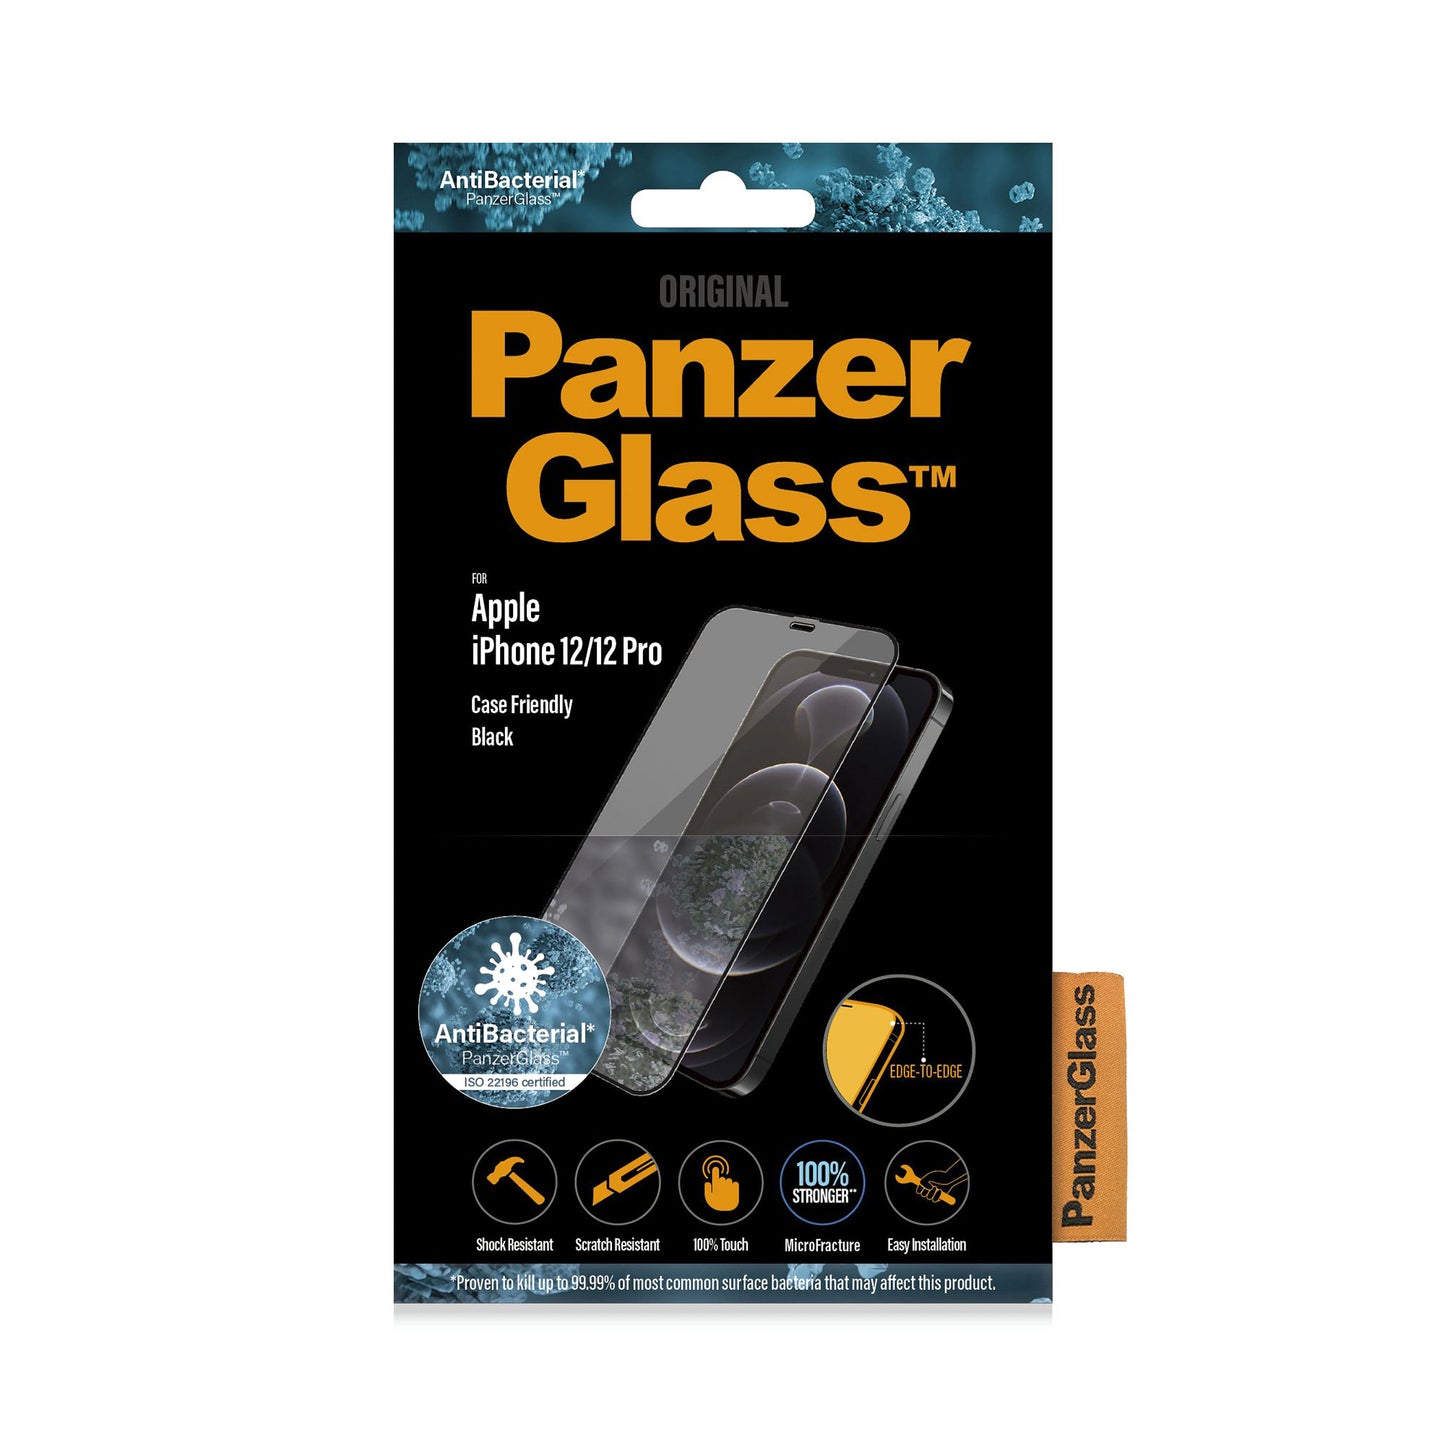 PANZERGLASS Case Friendly Black for iPhone 12 / 12 Pro - Clear